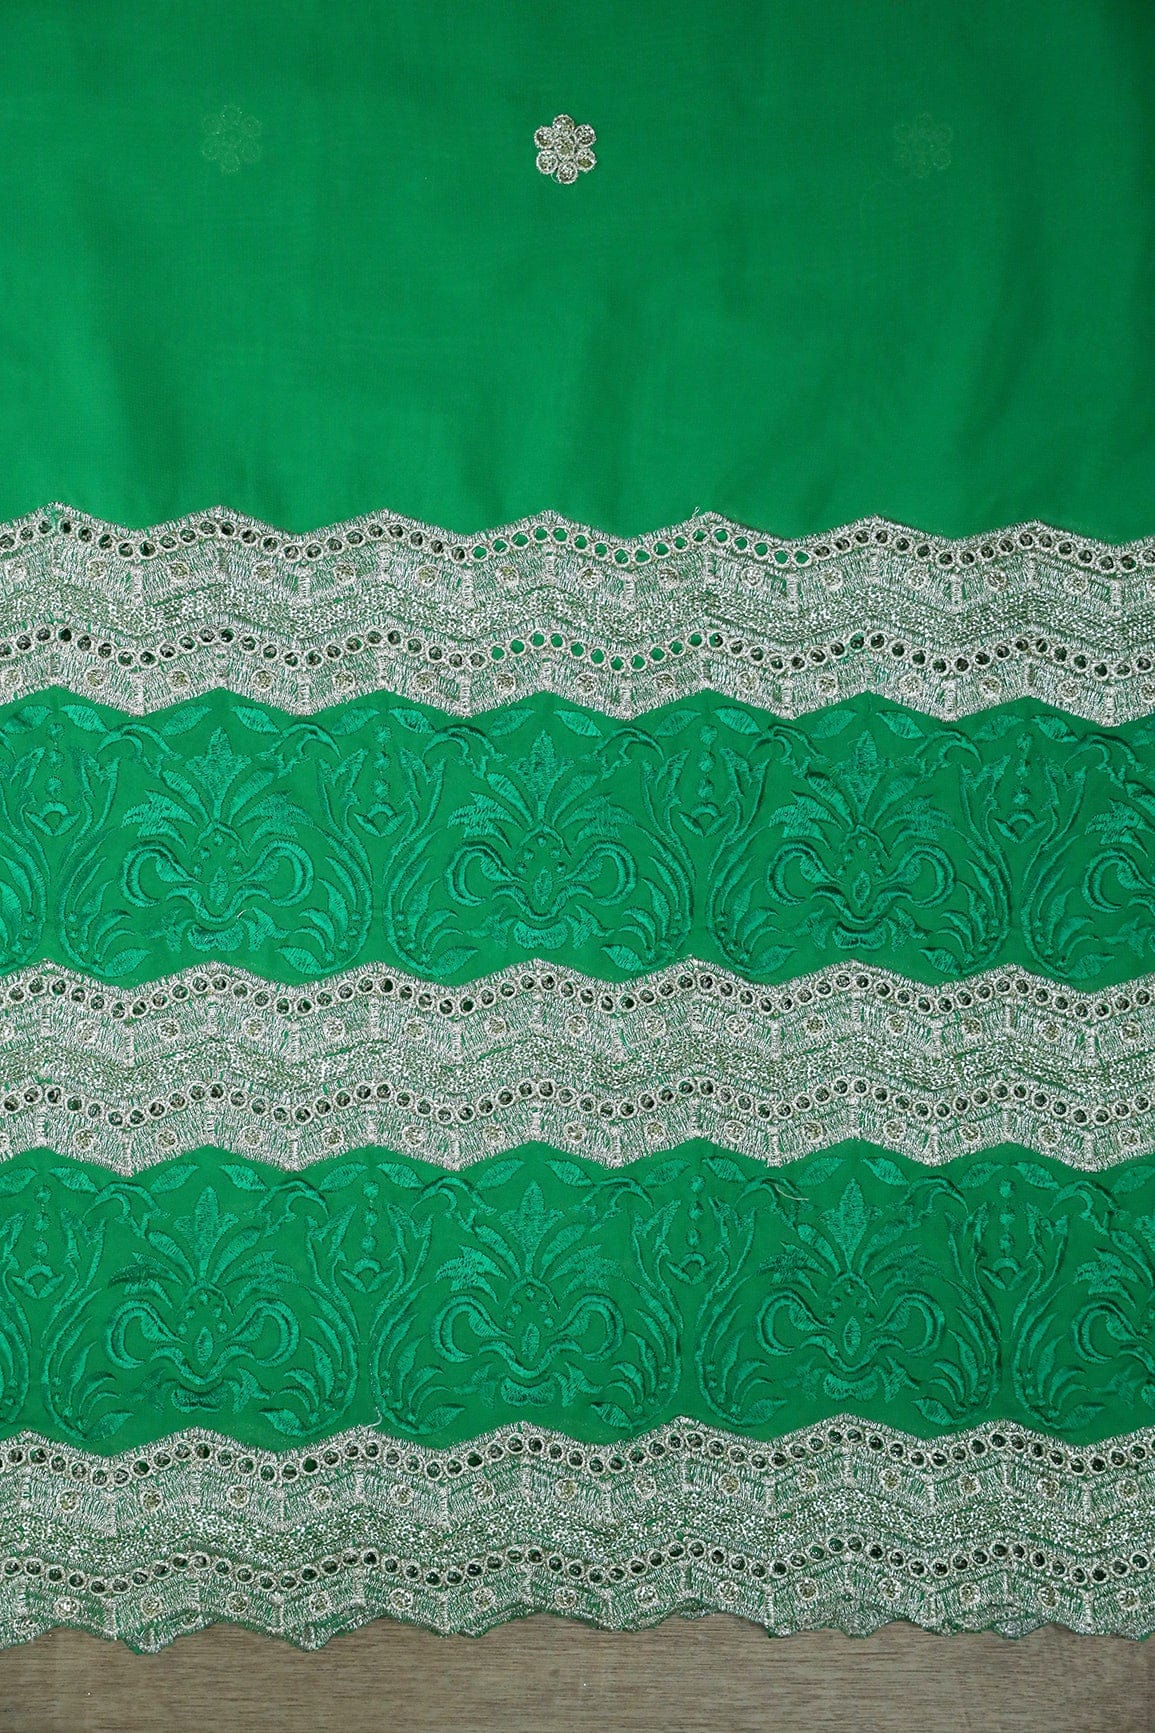 Big Width''56'' Green Thread With Zari Ethnic Embroidery Work On Green Georgette Fabric With Border - doeraa